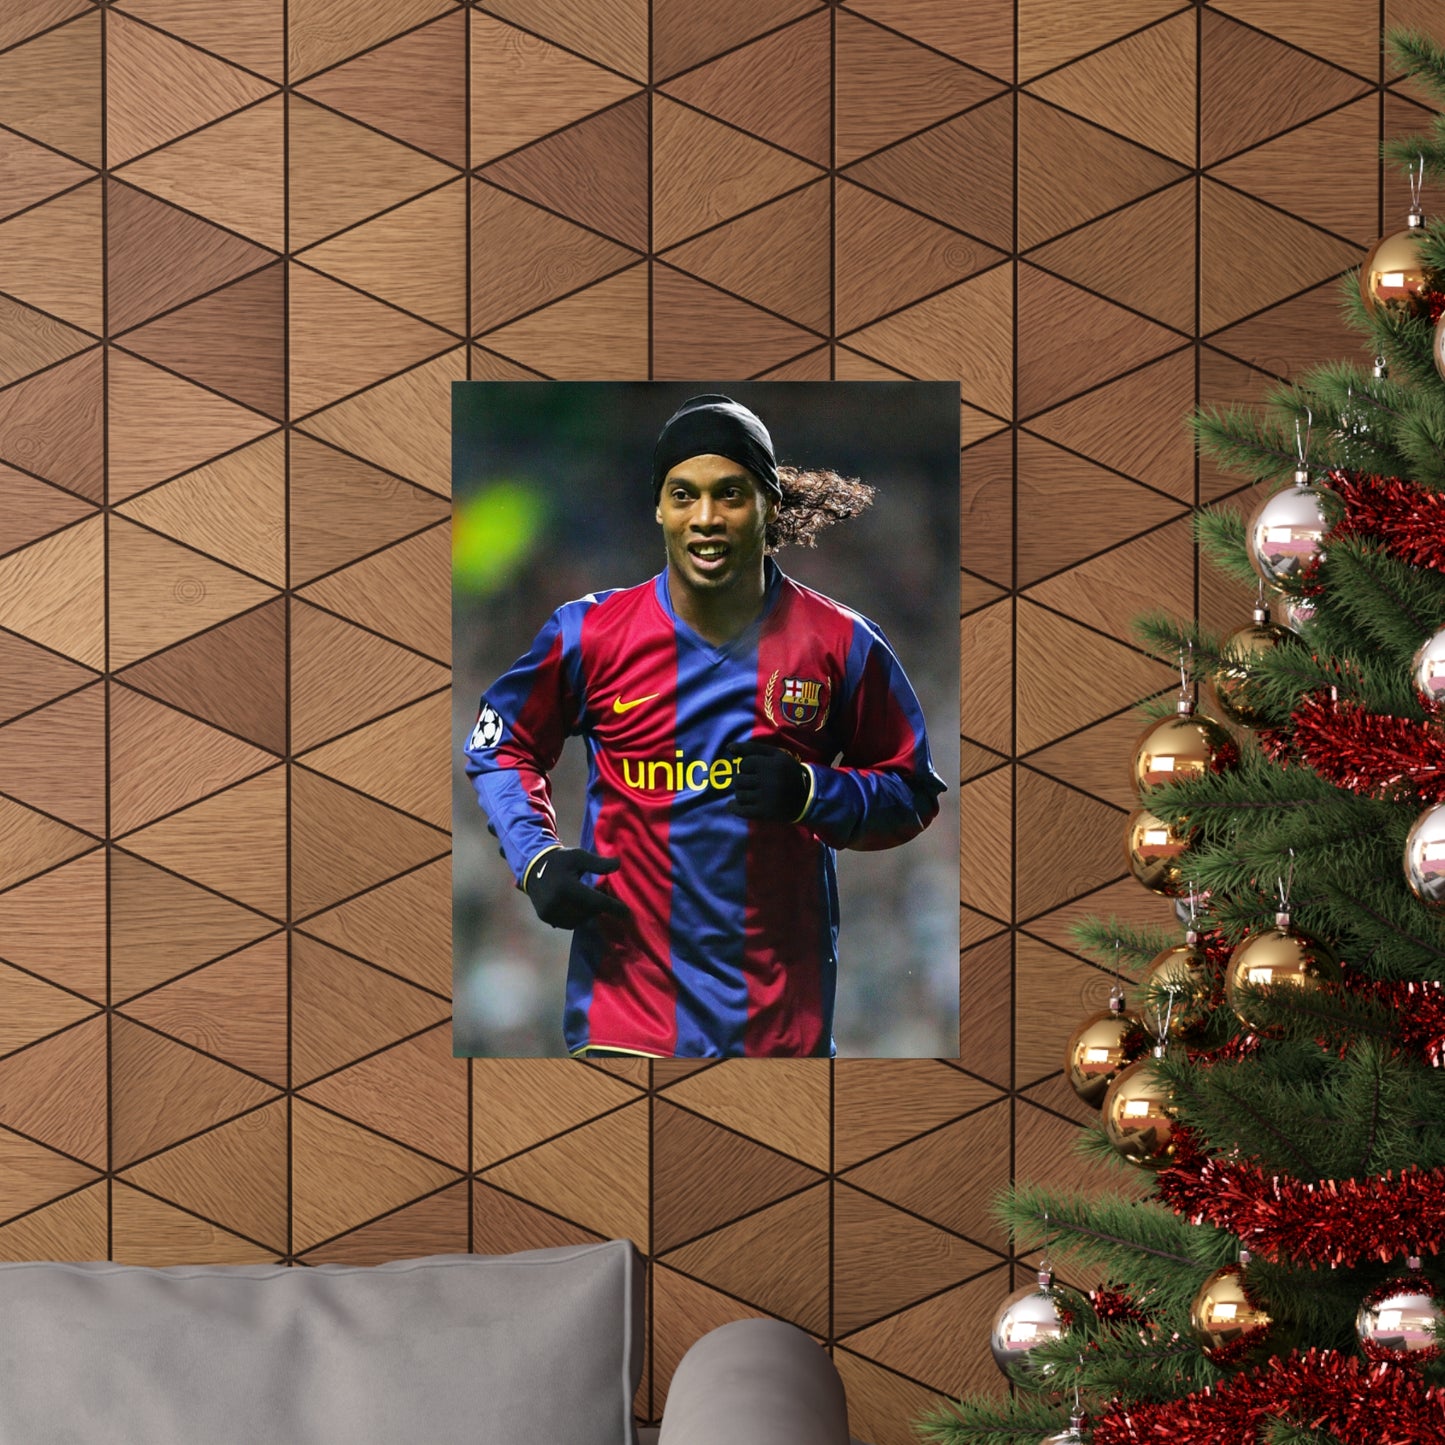 Ronaldinho Playing With Barcelona Poster